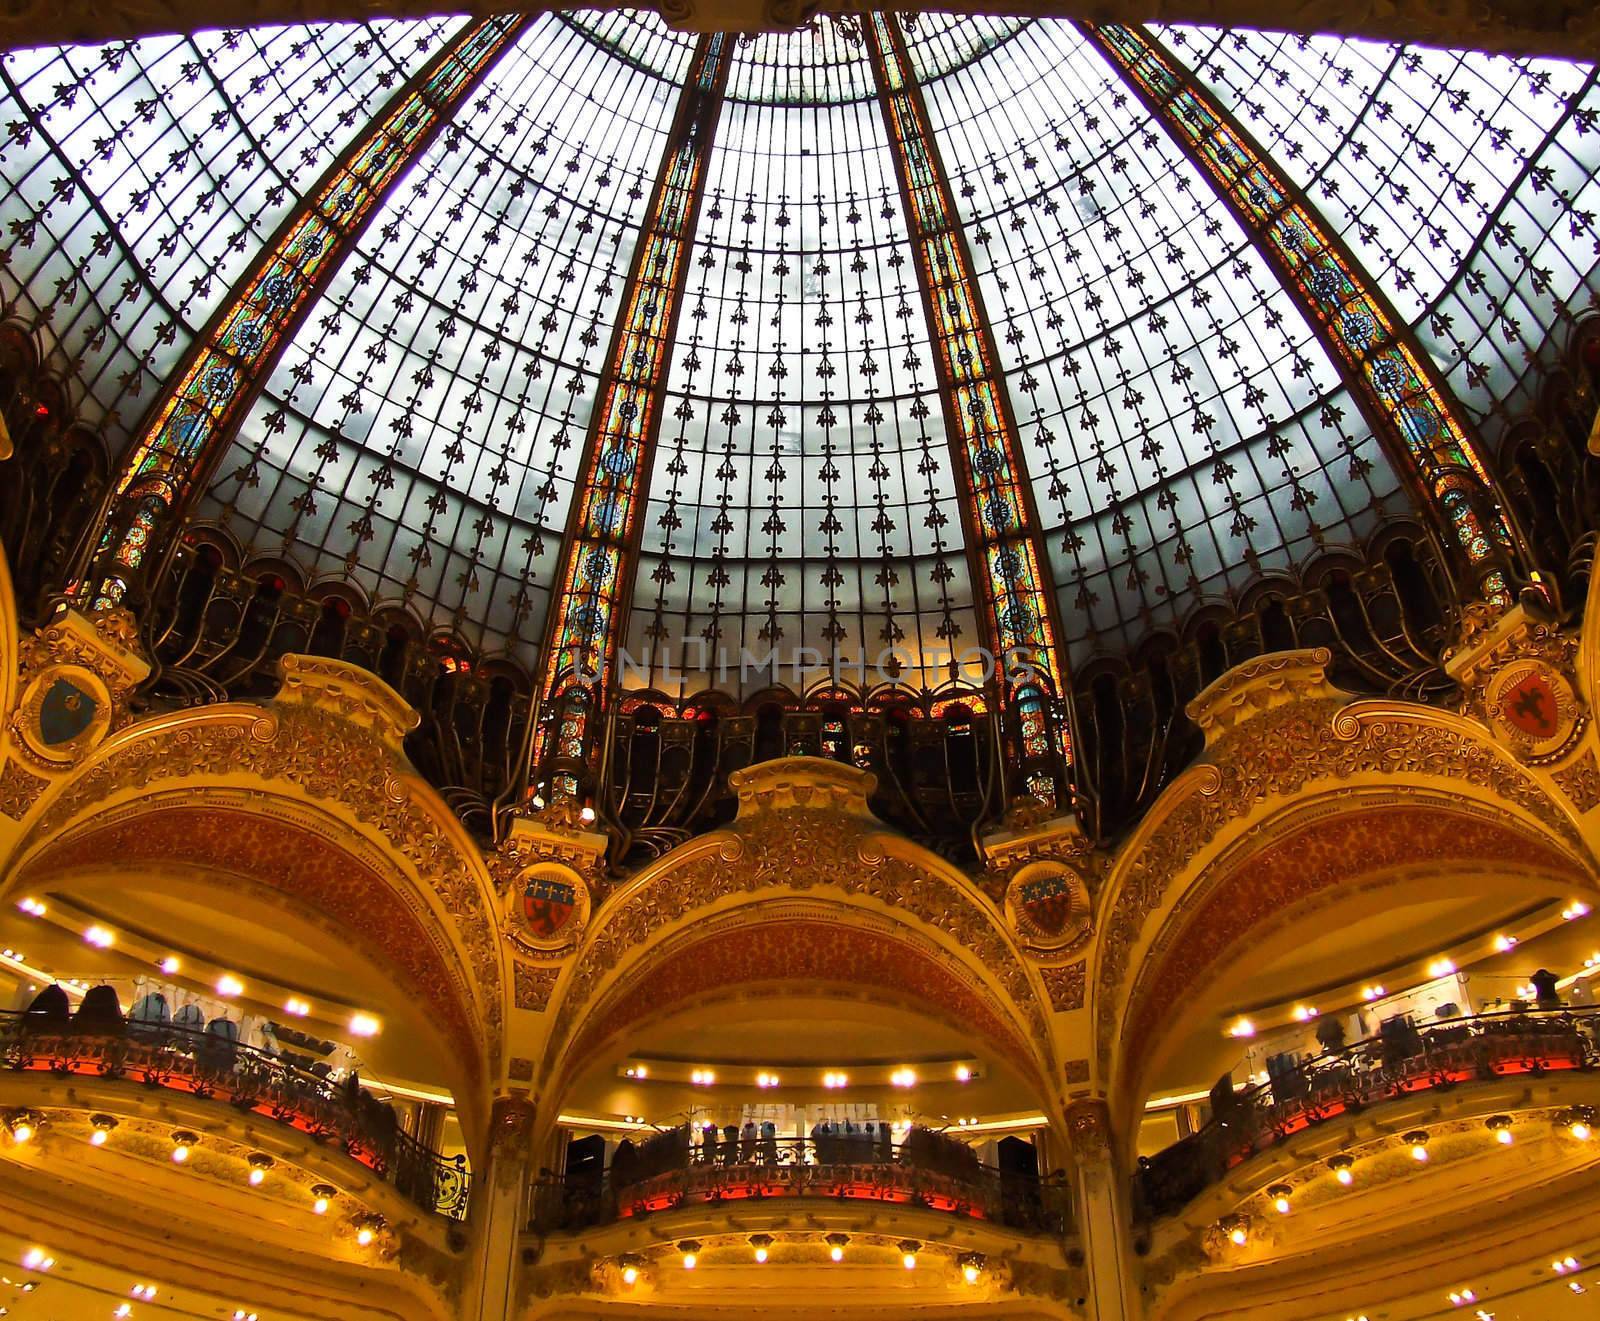 Details of glass dome inside the Galleries Lafayette